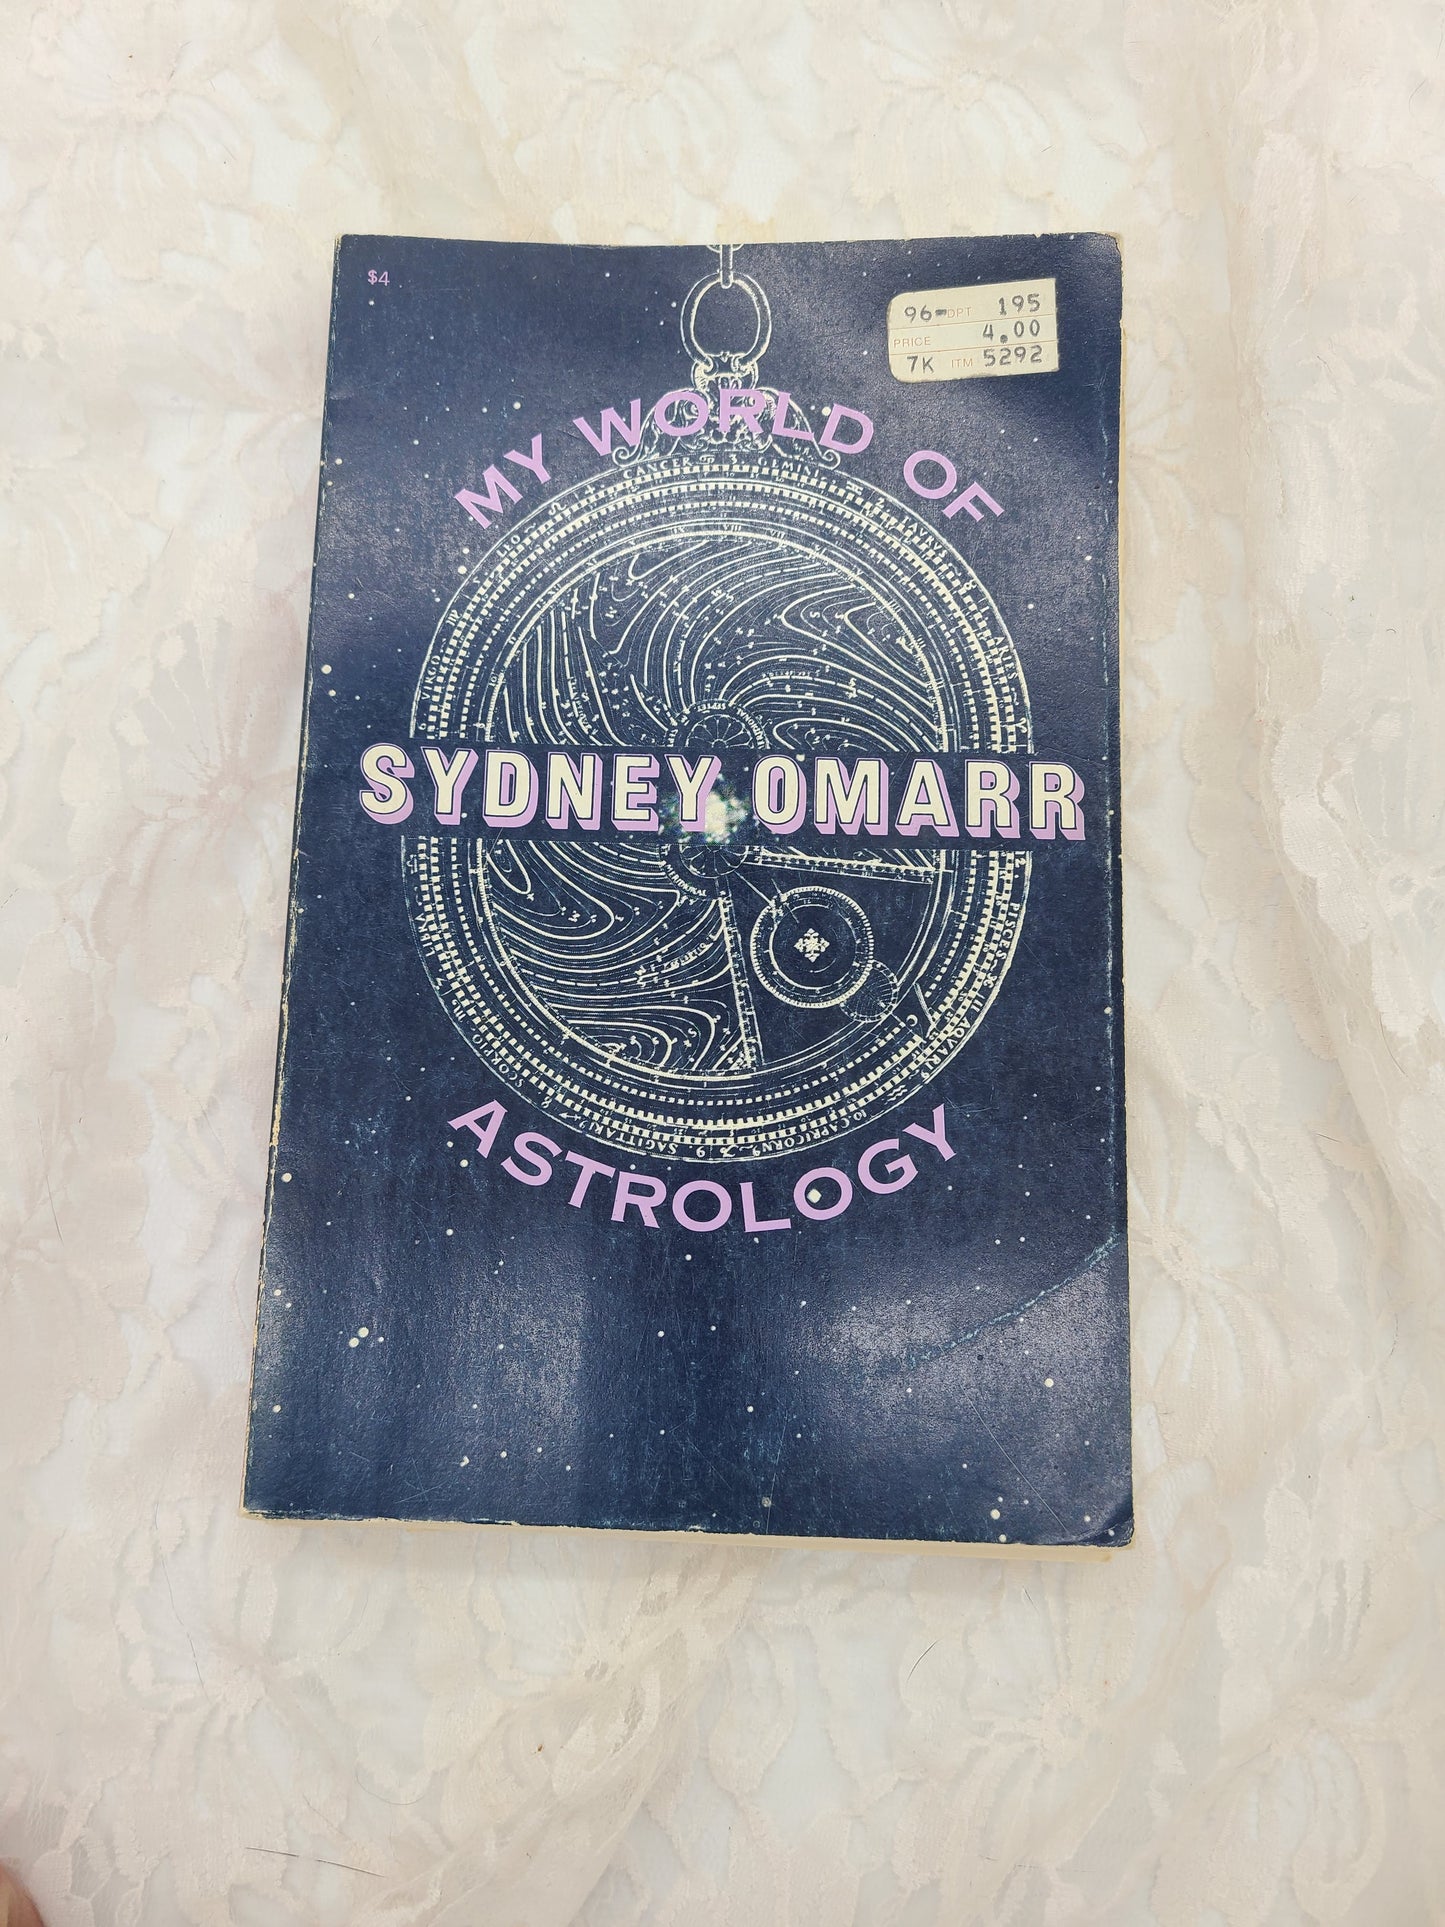 Lot of Three (3) Books VINTAGE 1970s Era Astrology/Astronomy Check it OUT